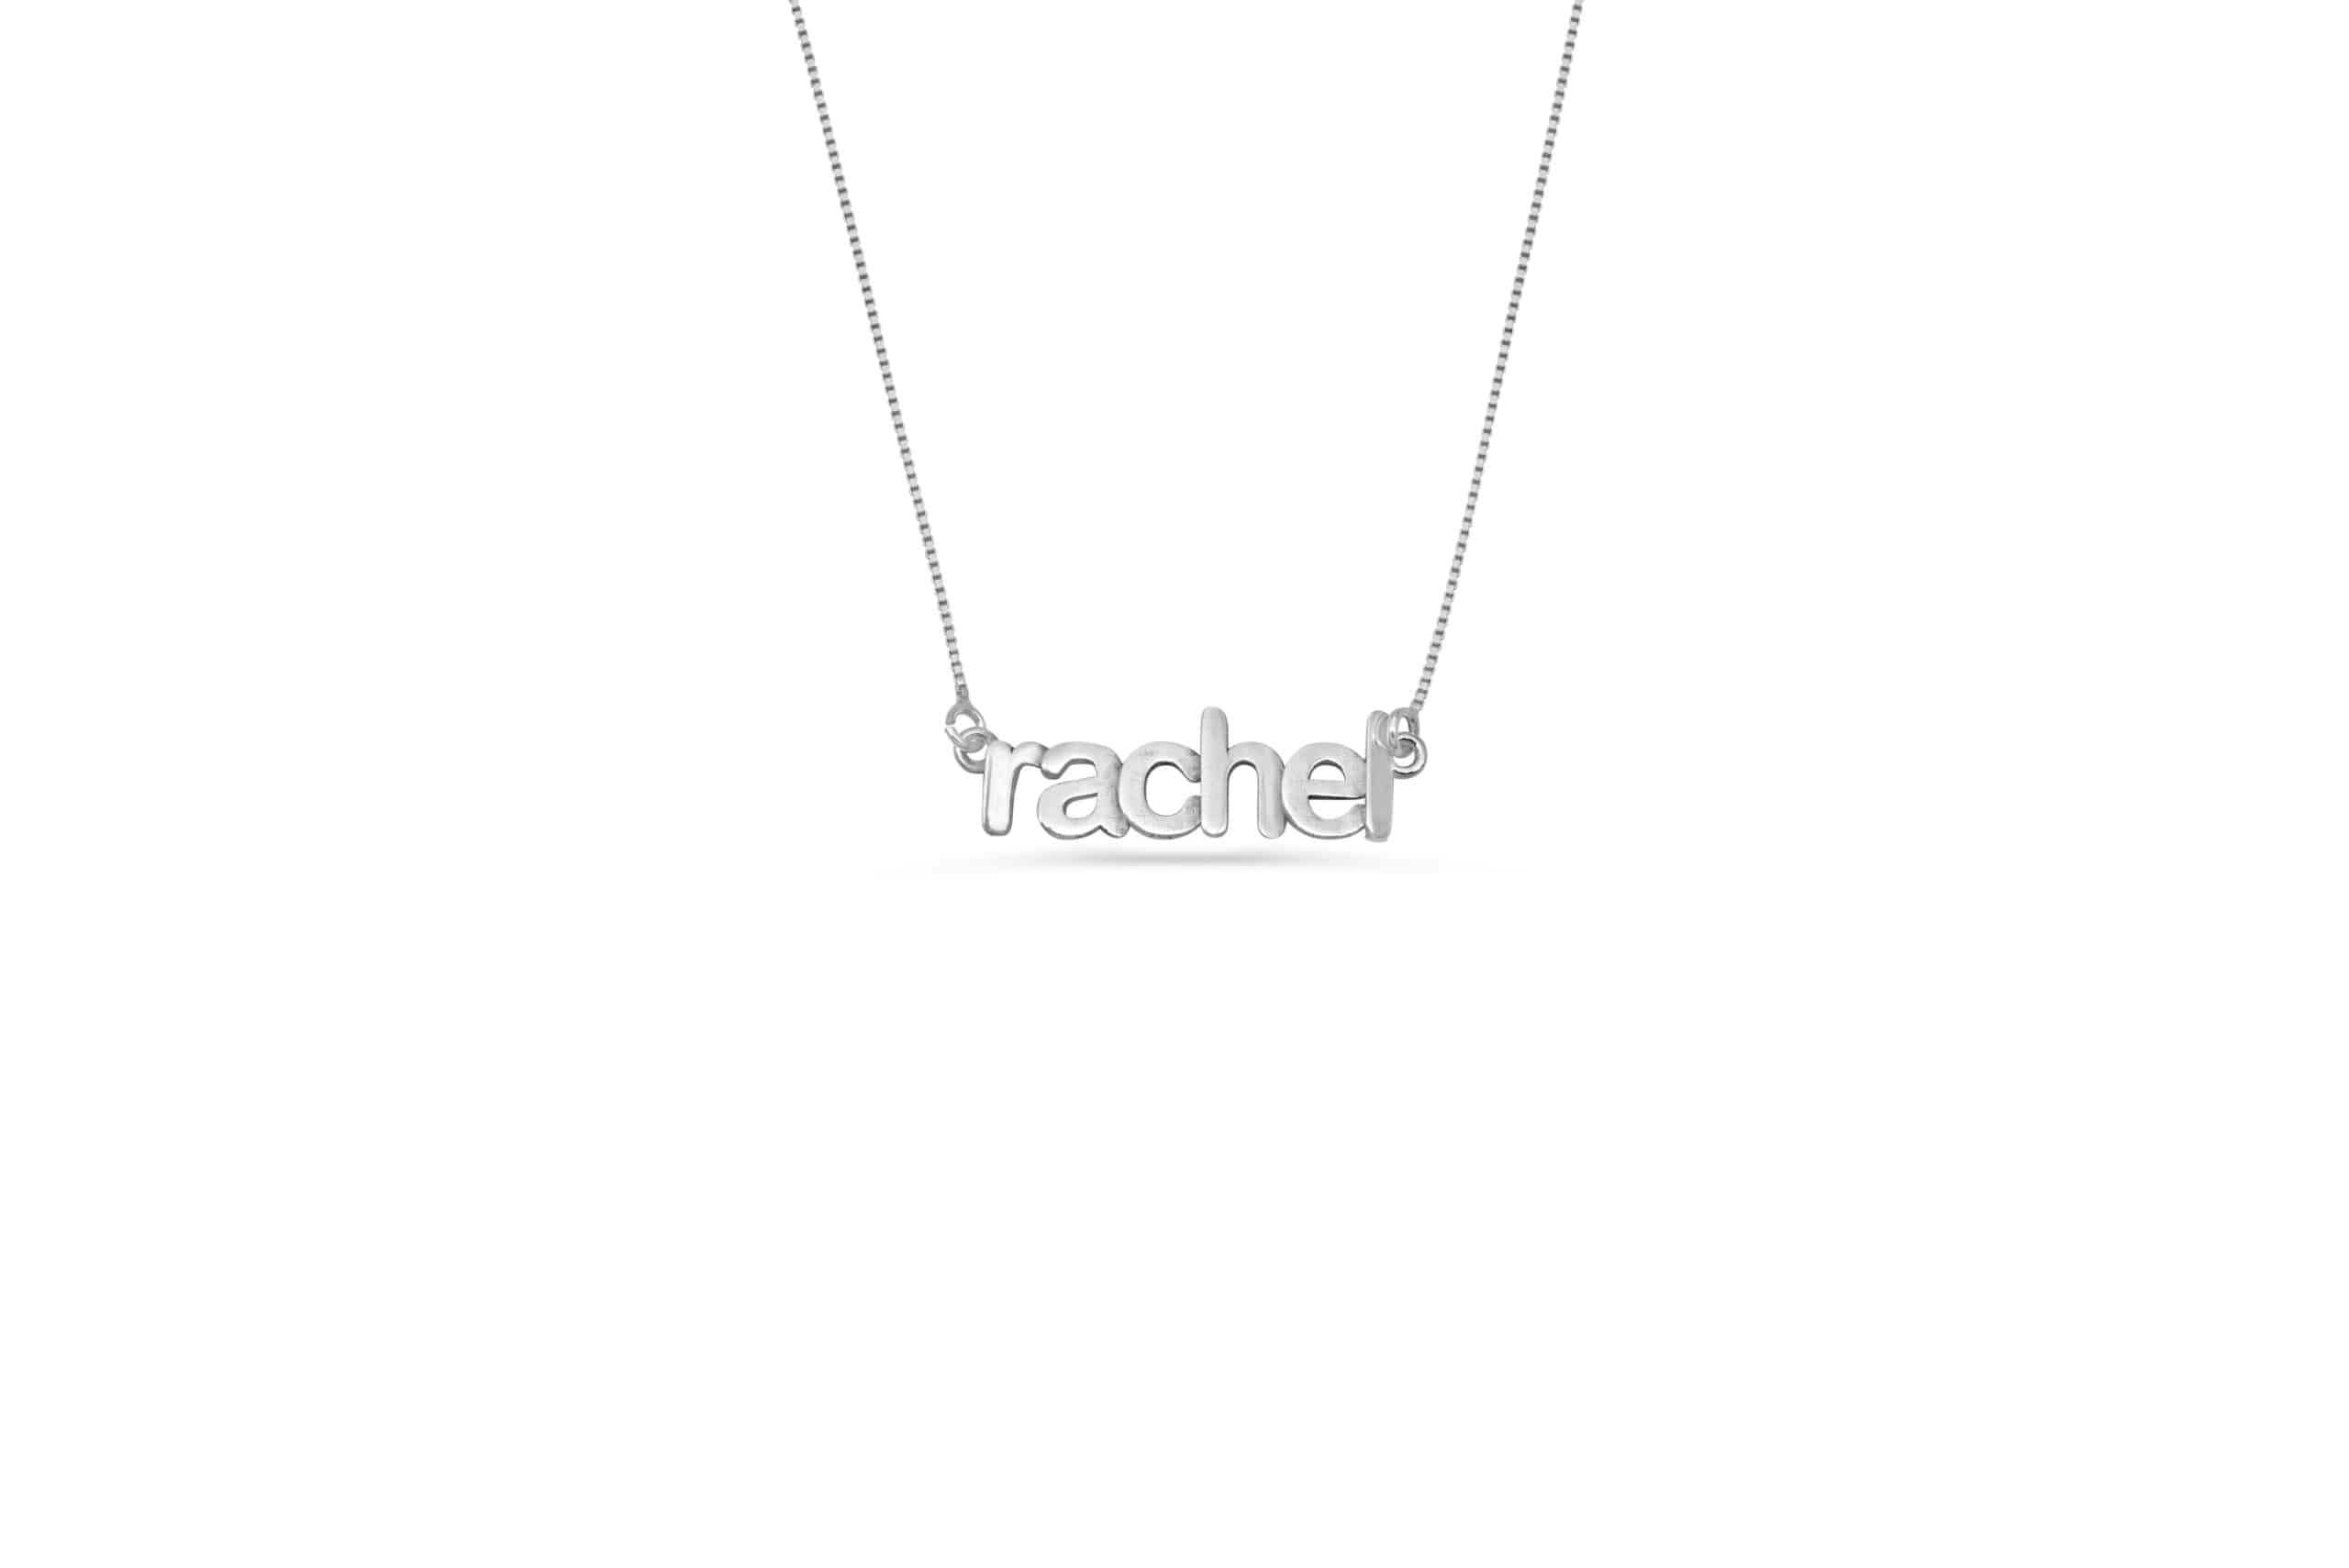 3D Sterling Silver Name Pendant